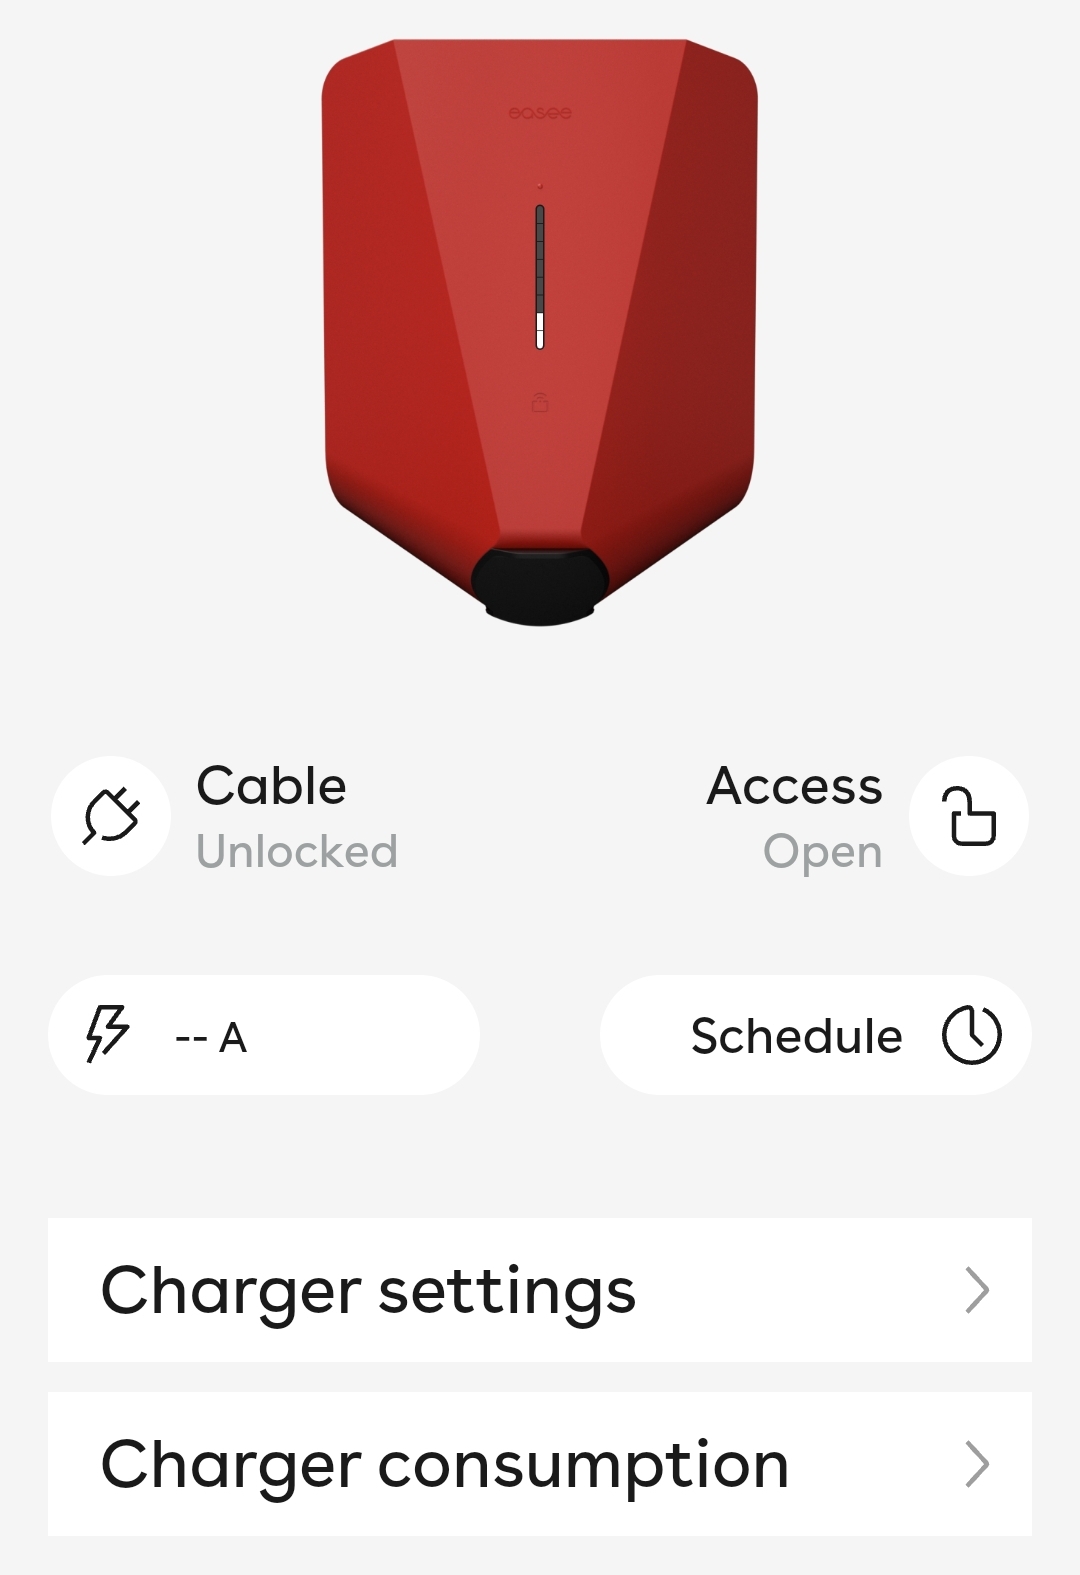 charger card with a red Easee charger